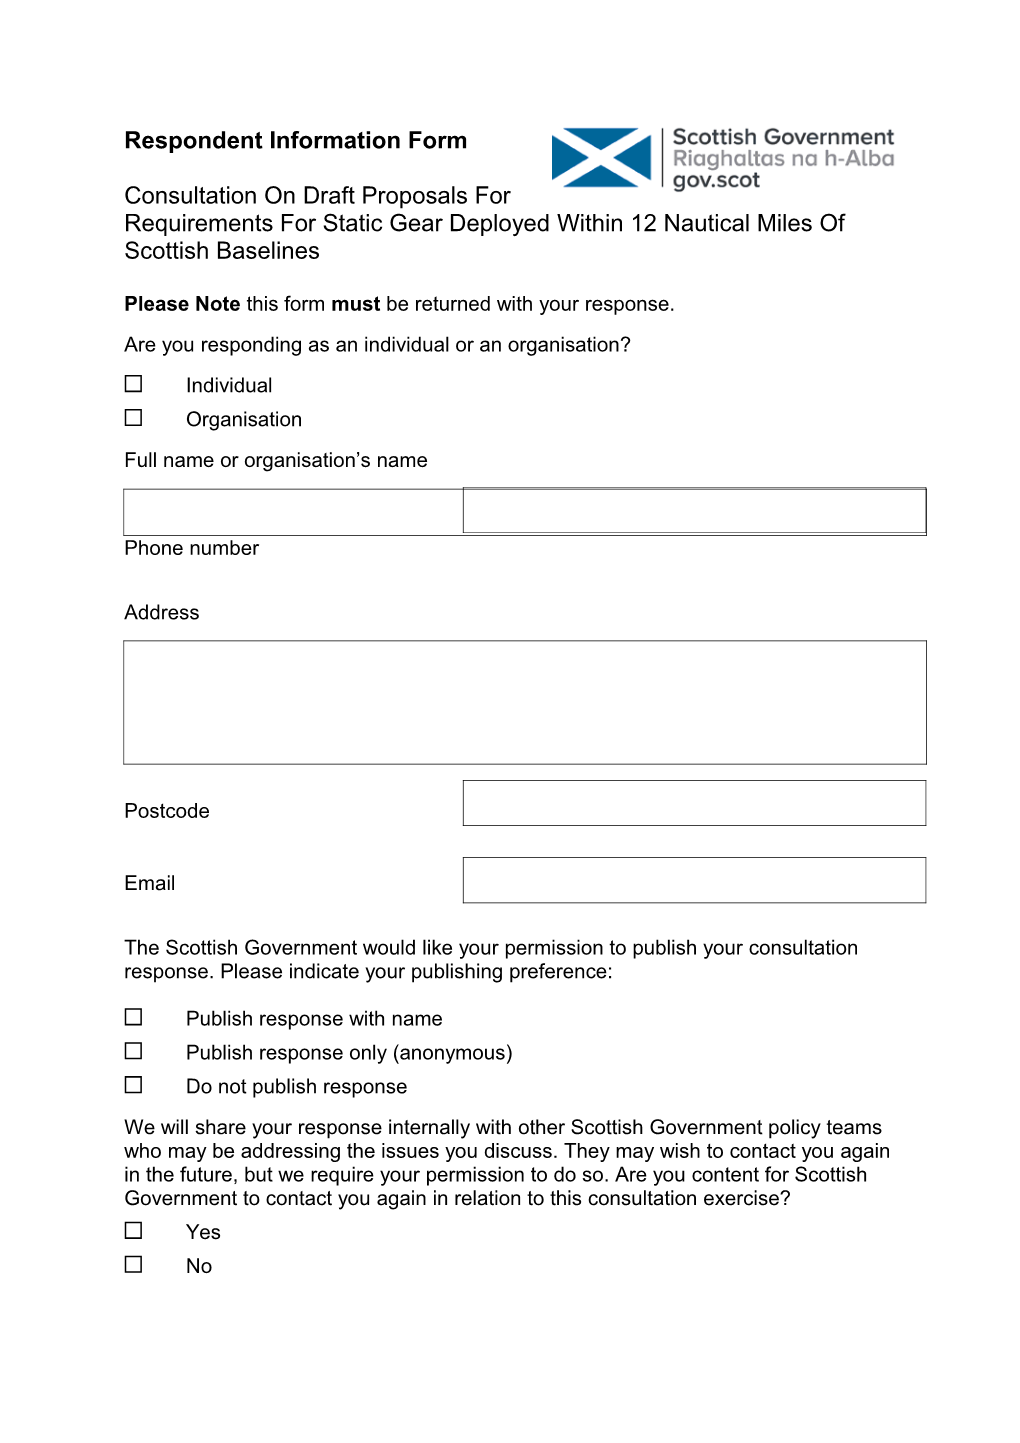 Please Note This Form Must Be Returned with Your Response